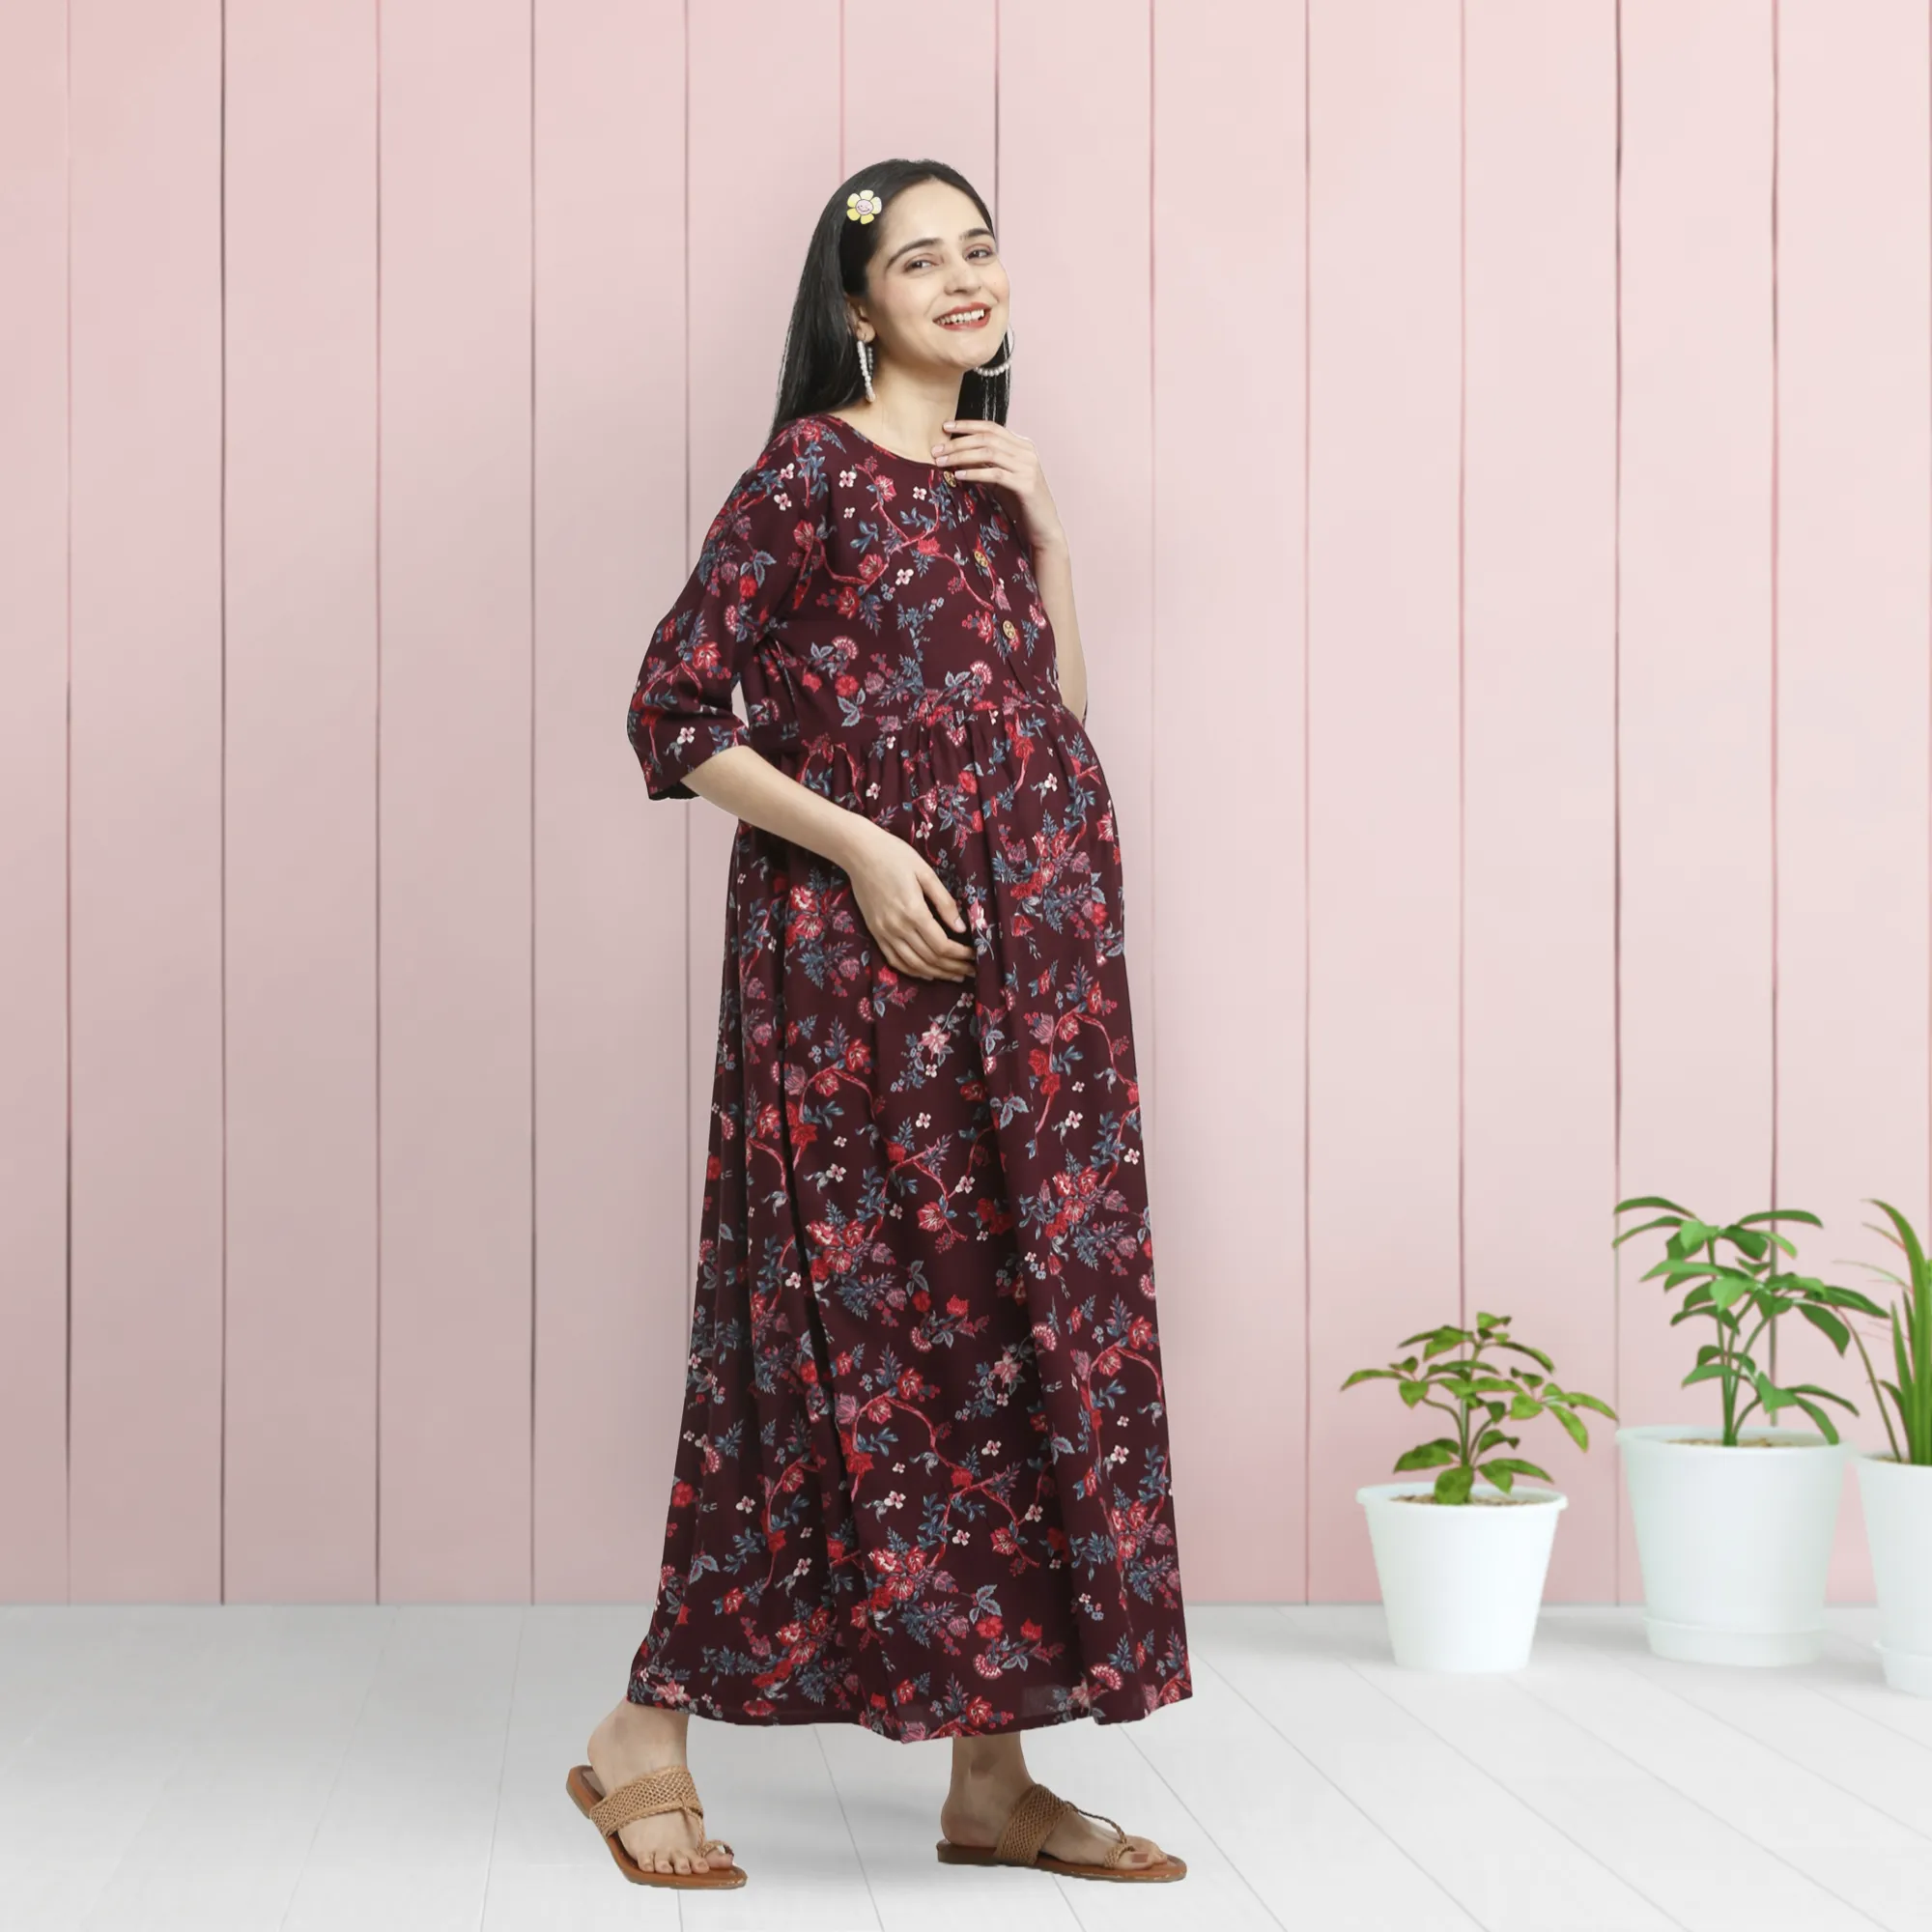 Maternity Dresses For Women with Both Side Zipper For Easy Feeding | Adjustable Belt for Growing Belly | Maxi Dress | Garden Flowers - Wine | XL